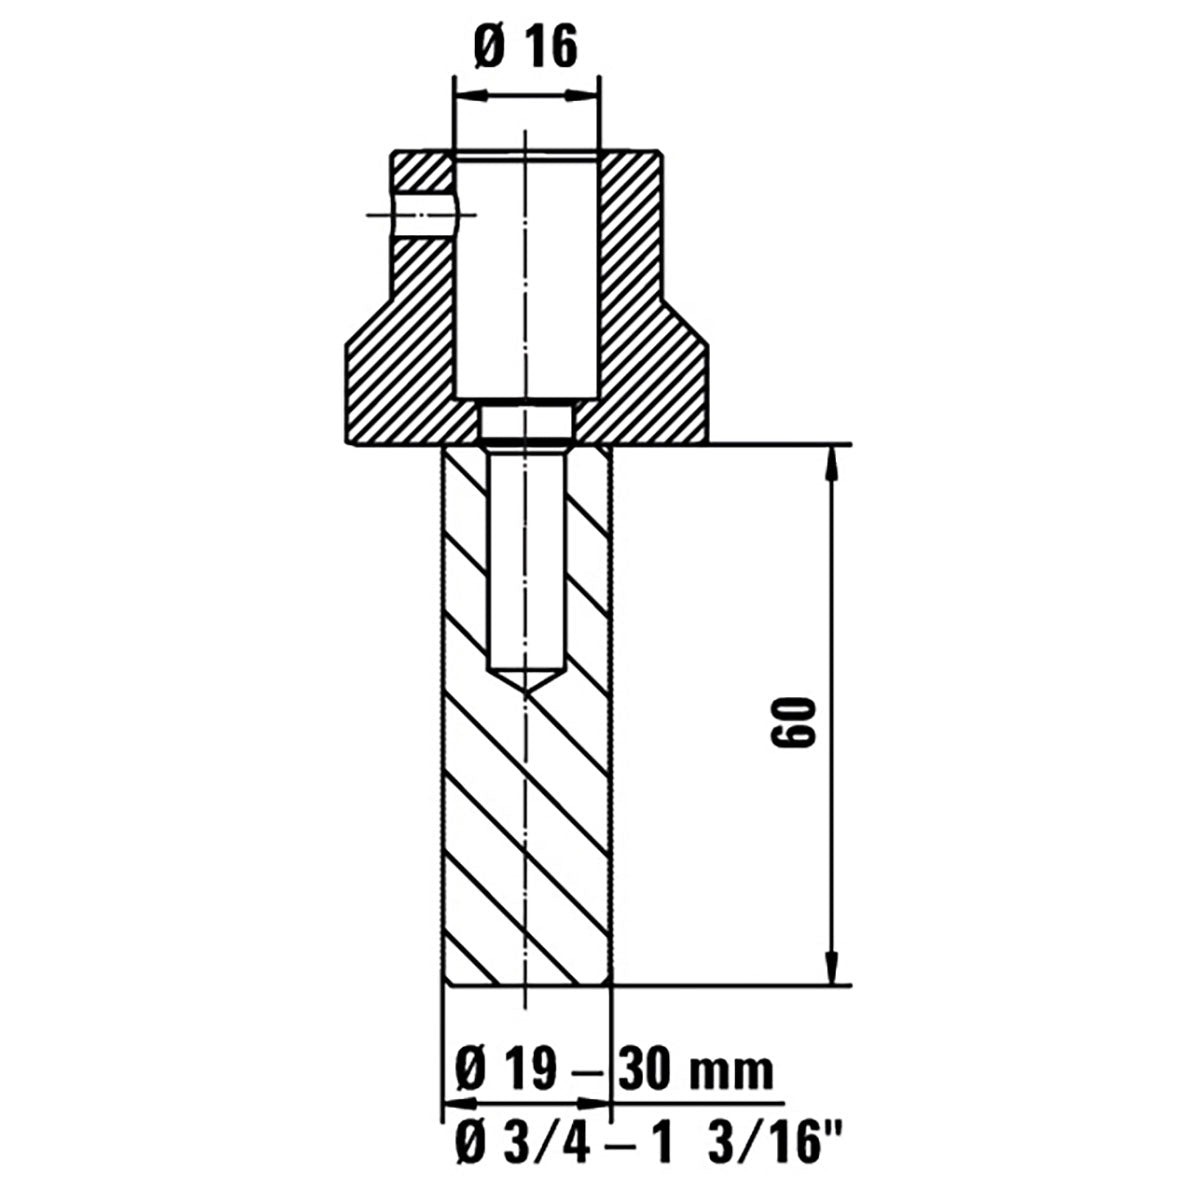 Bessey TW16AW19 - Adapter for Bessey TW16AW19 fasteners